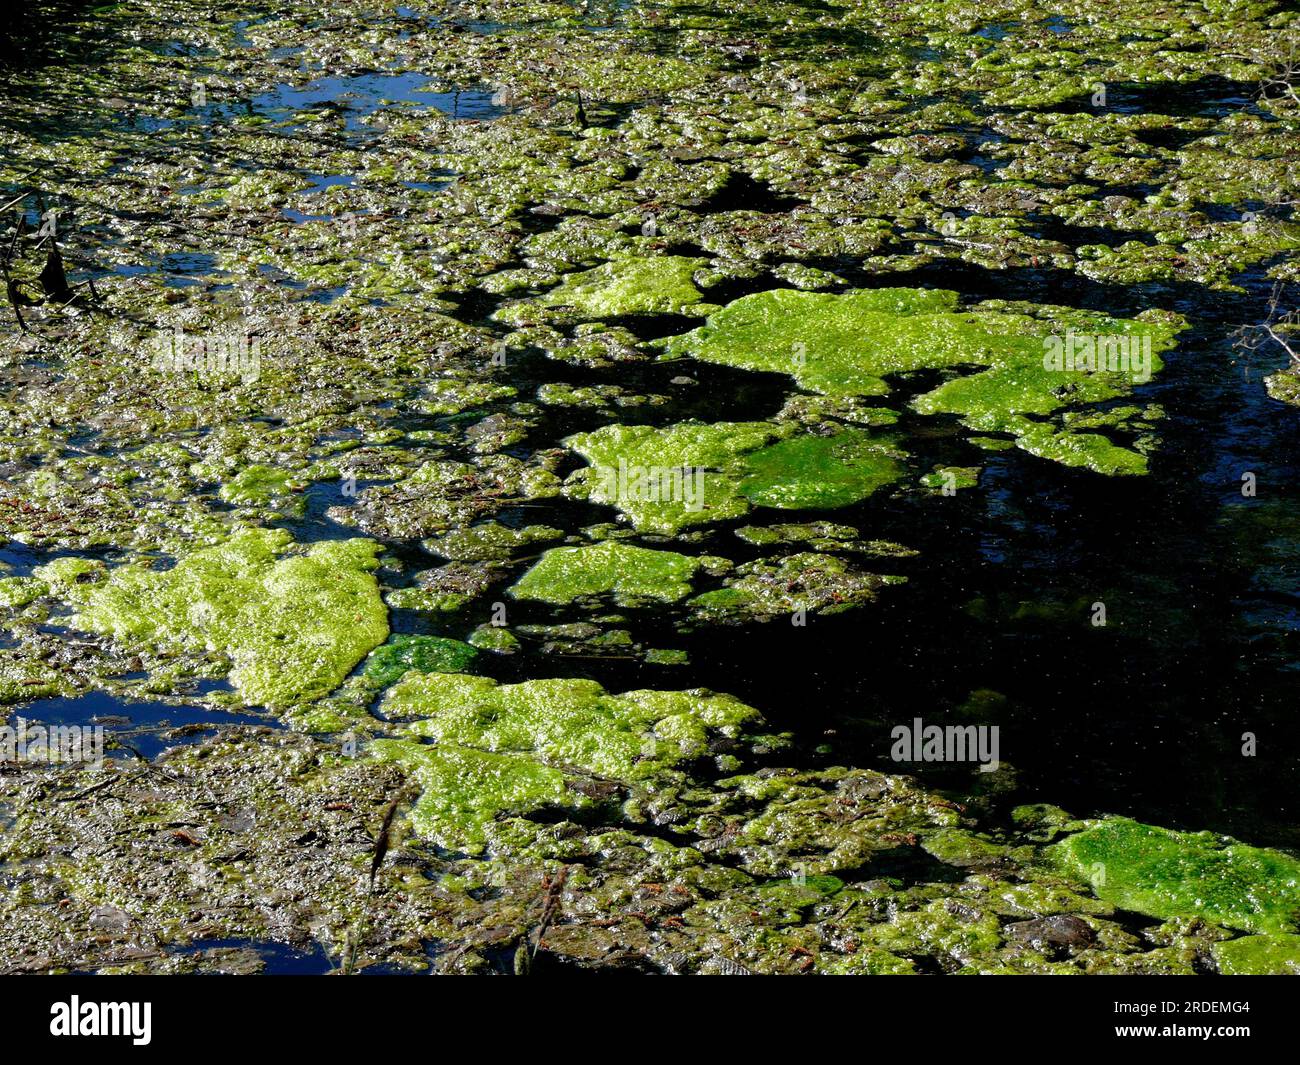 Pond with lily pads and algae Stock Photo